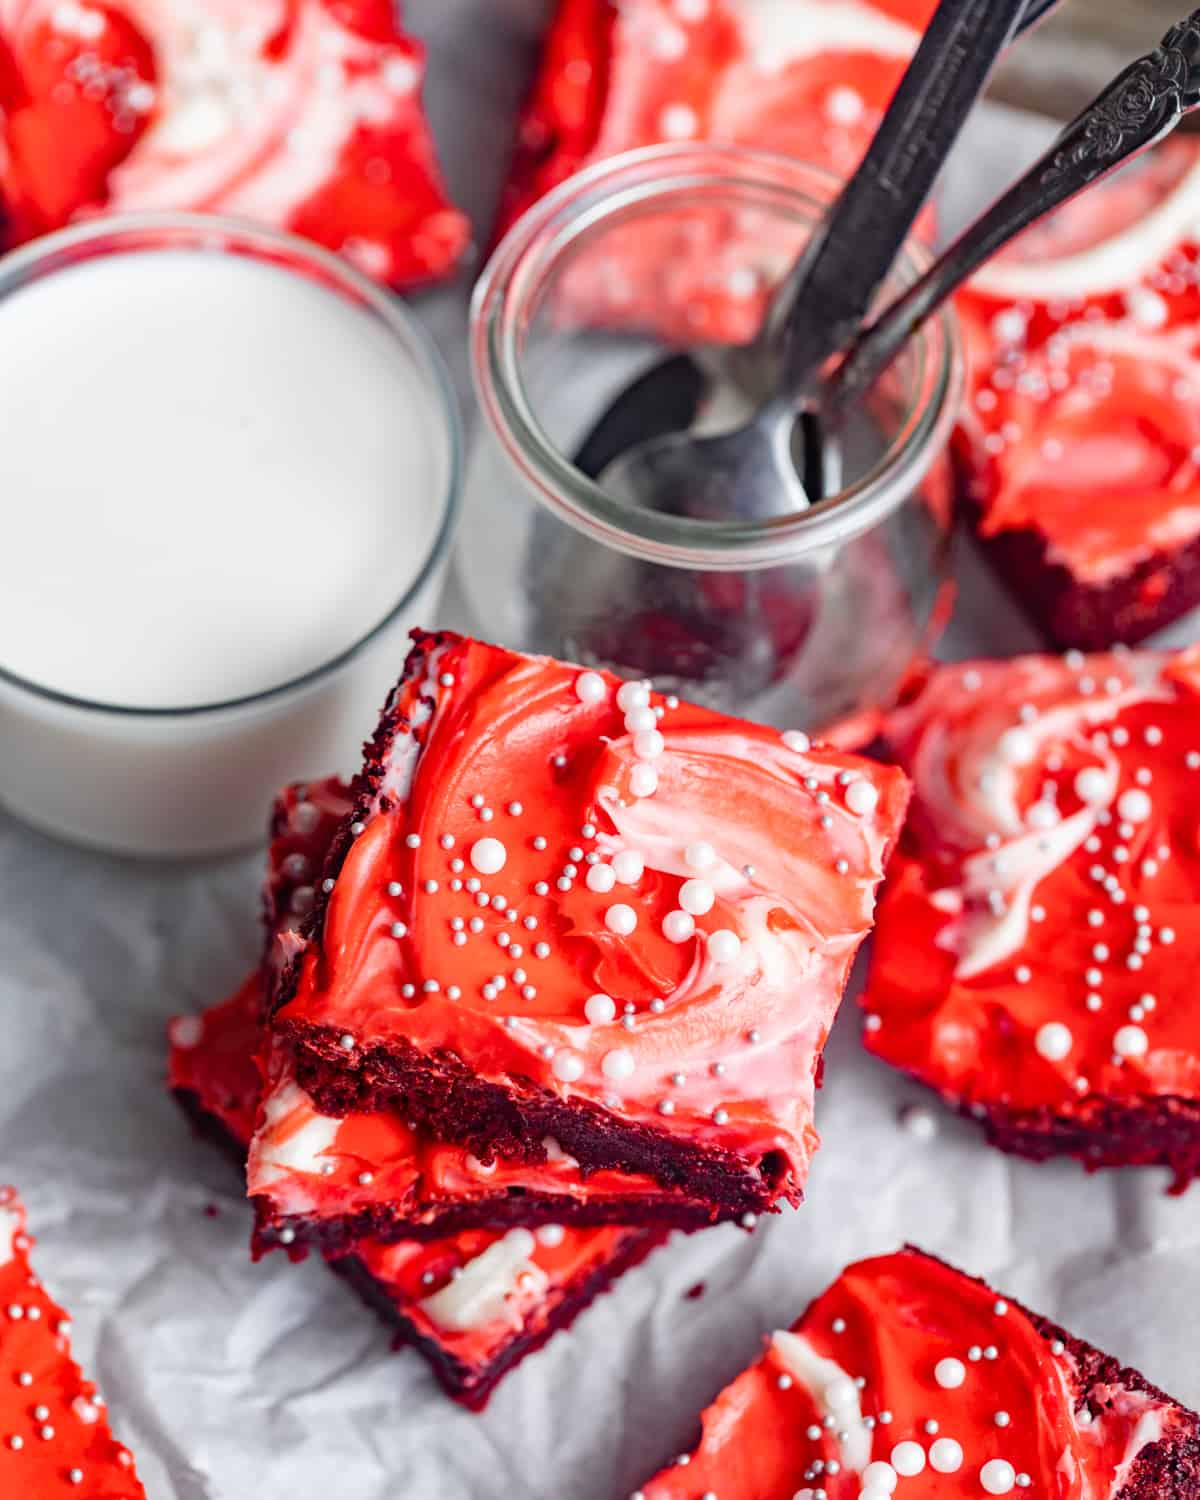 red velvet brownies on a serving platter cut into square pieces next to a glass of milk.